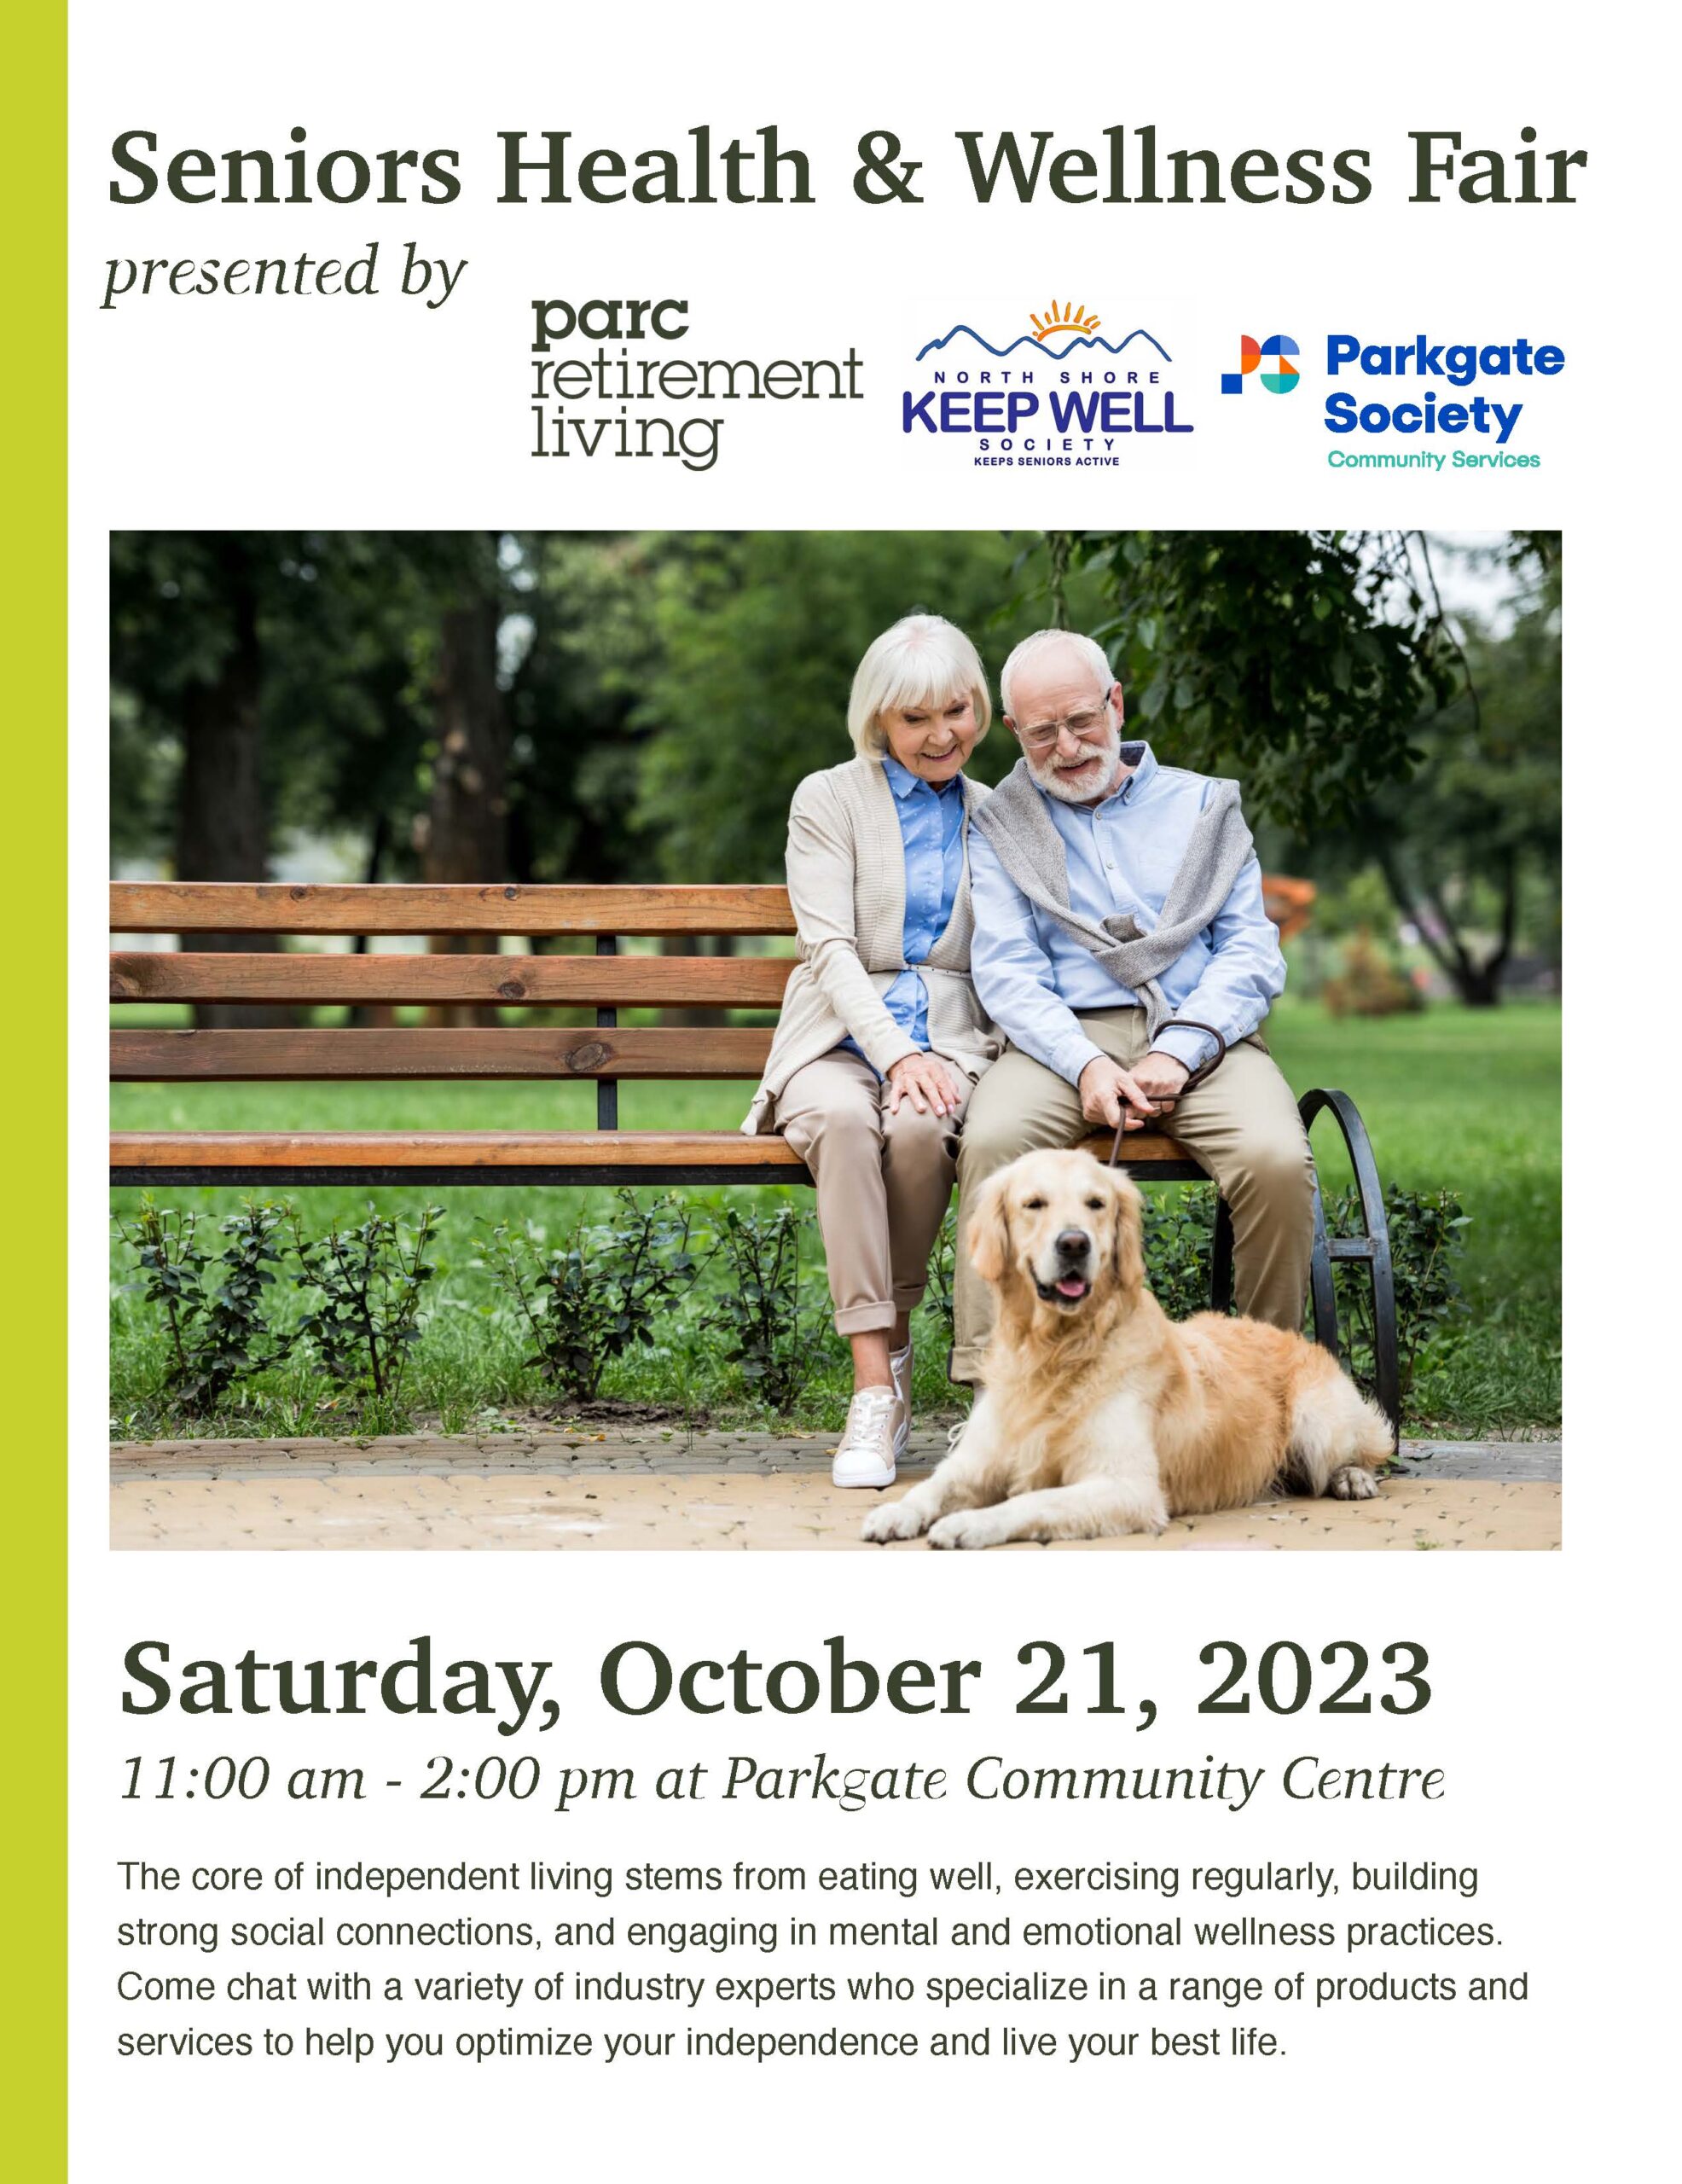 Saturday, October 21, 2023 11:00 am - 2:00 pm at Parkgate Community Centre The core of independent living stems from eating well, exercising regularly, building strong social connections, and engaging in mental and emotional wellness practices. Come chat with a variety of industry experts who specialize in a range of products and services to help you optimize your independence and live your best life.